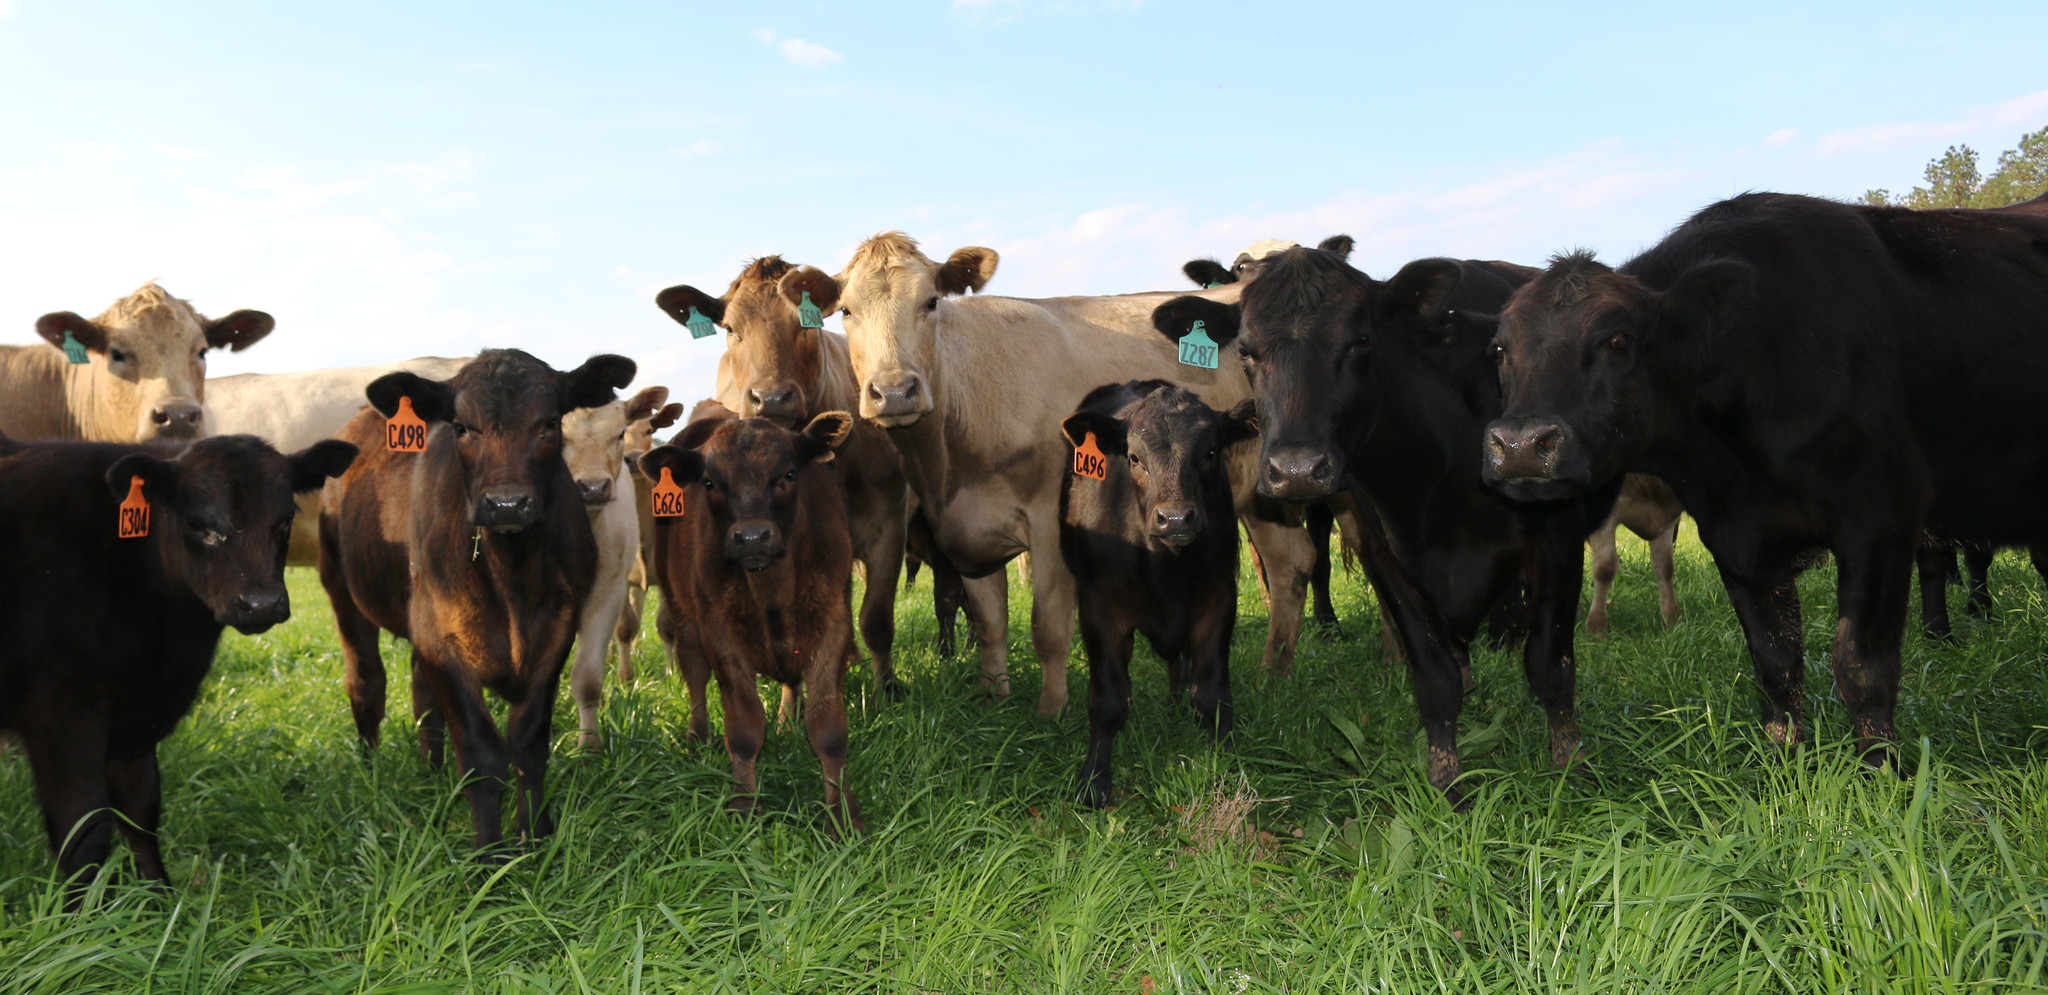 Group of commercial cows and calves